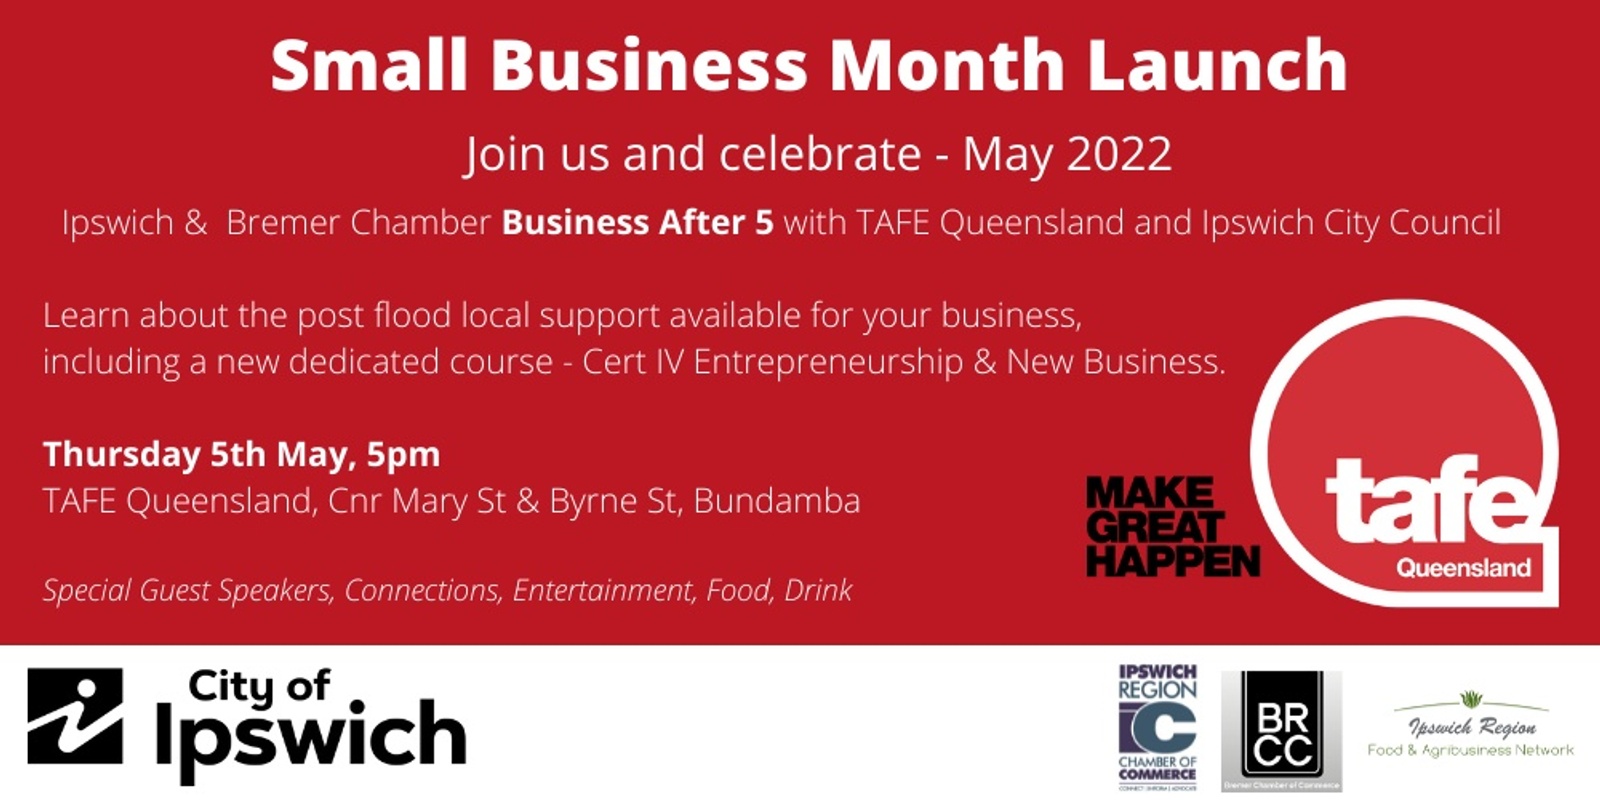 Banner image for Small Business Month Launch with TAFE Qld and Ipswich City Council